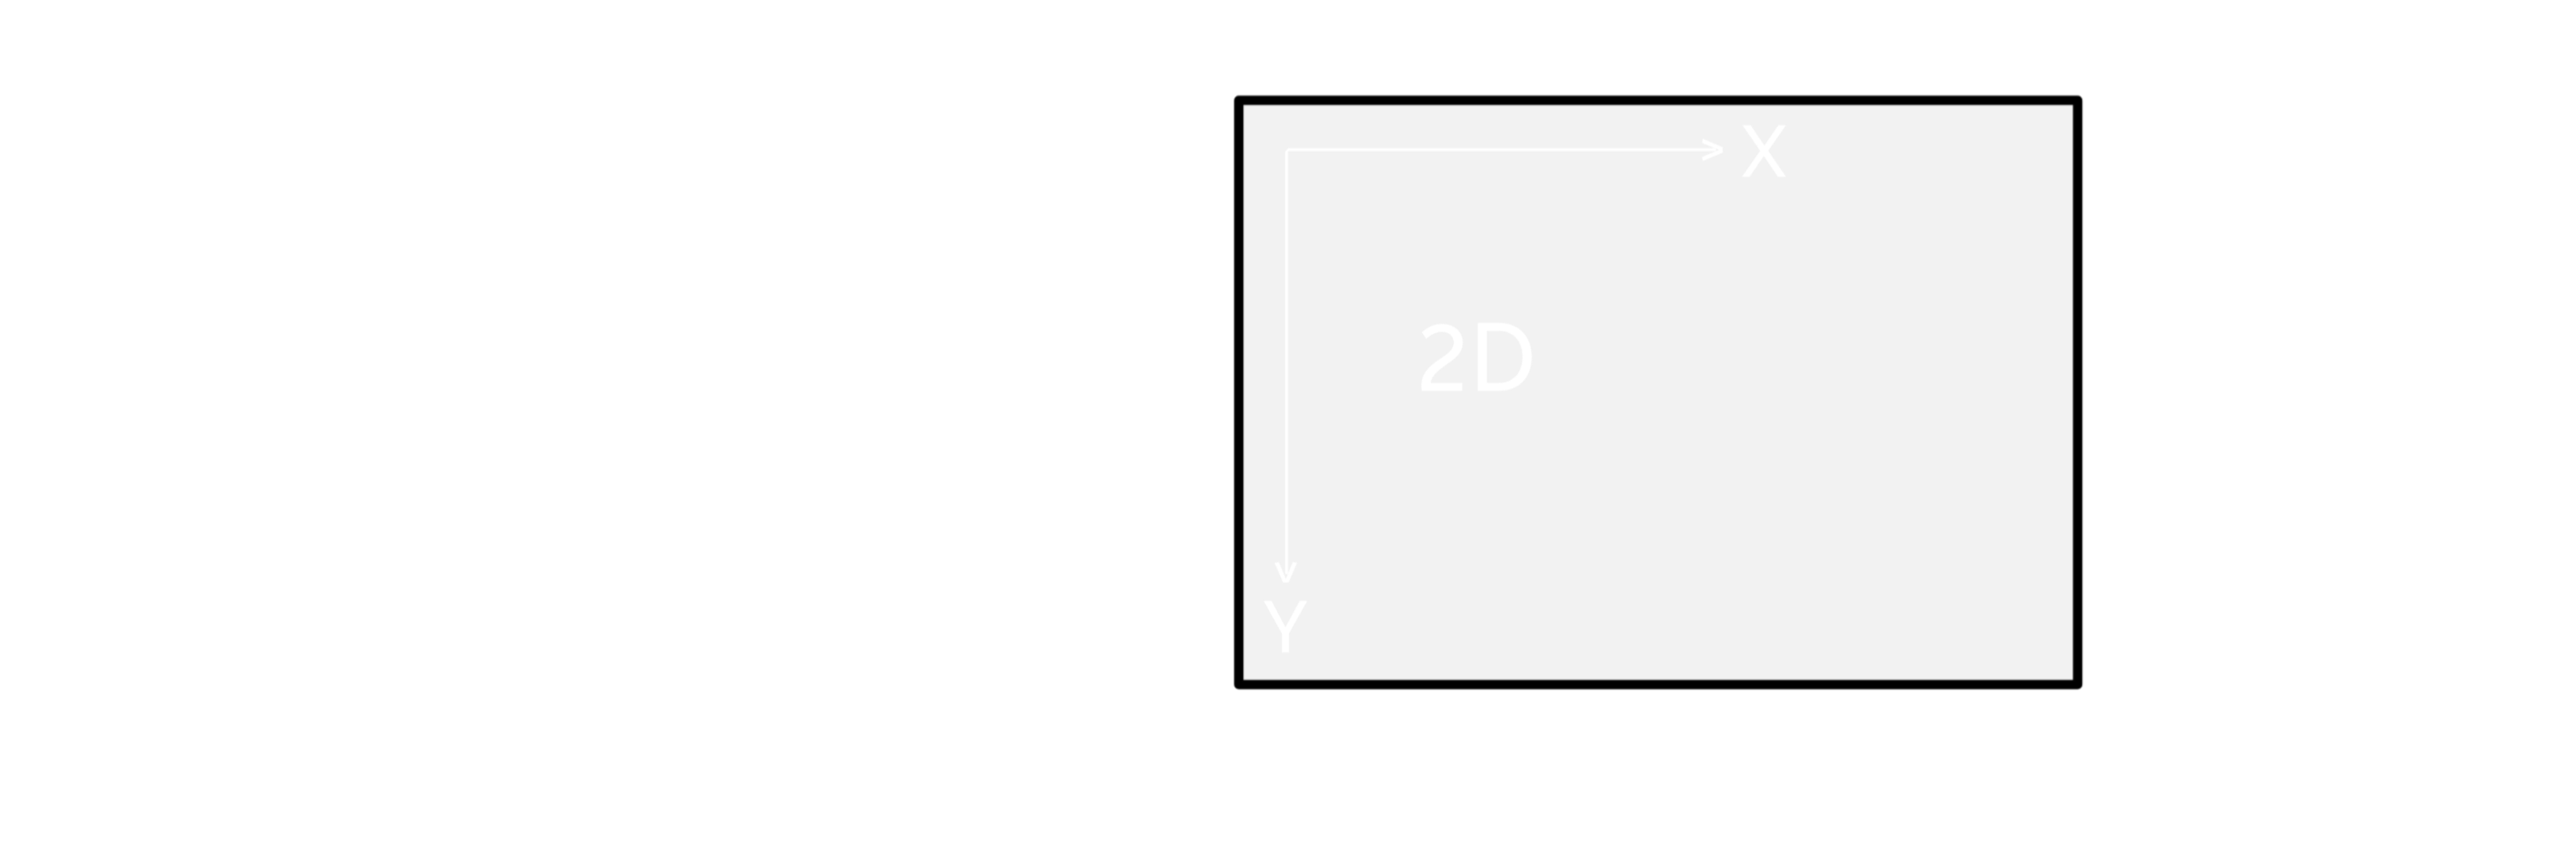 3D space to 2D screen